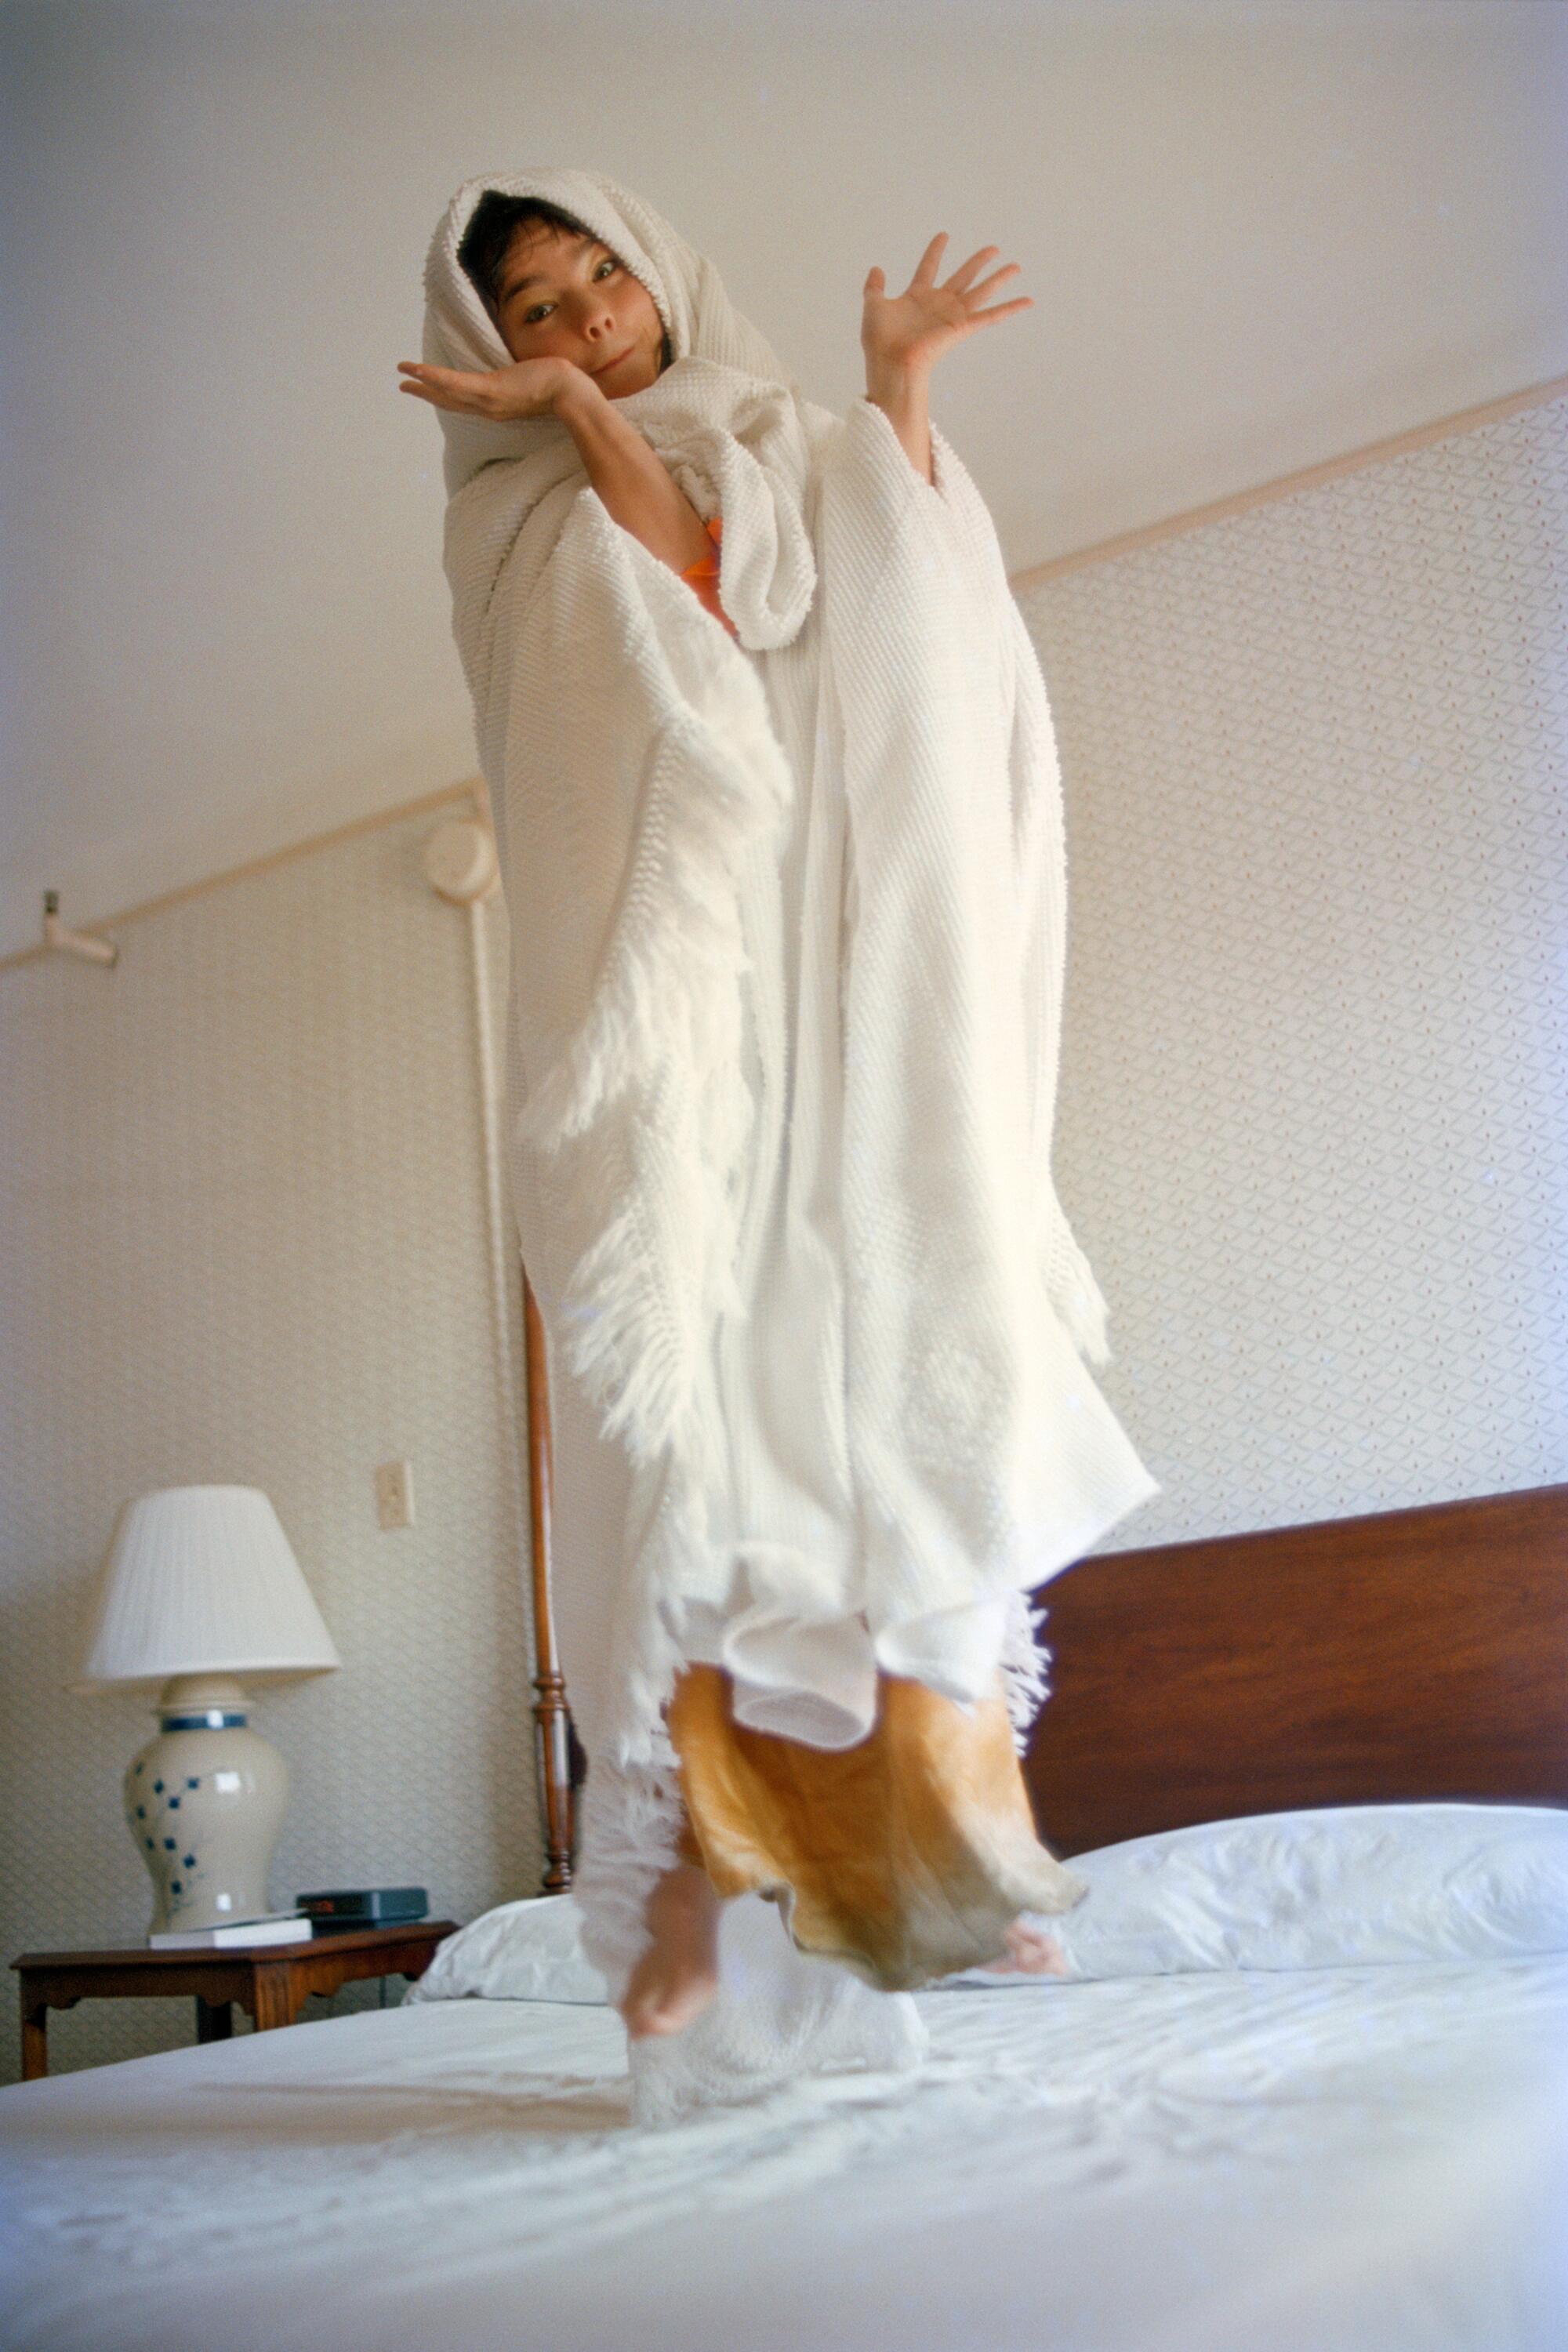 Björk jumps on a bed, wrapped in a white sheet, and makes a playful face.